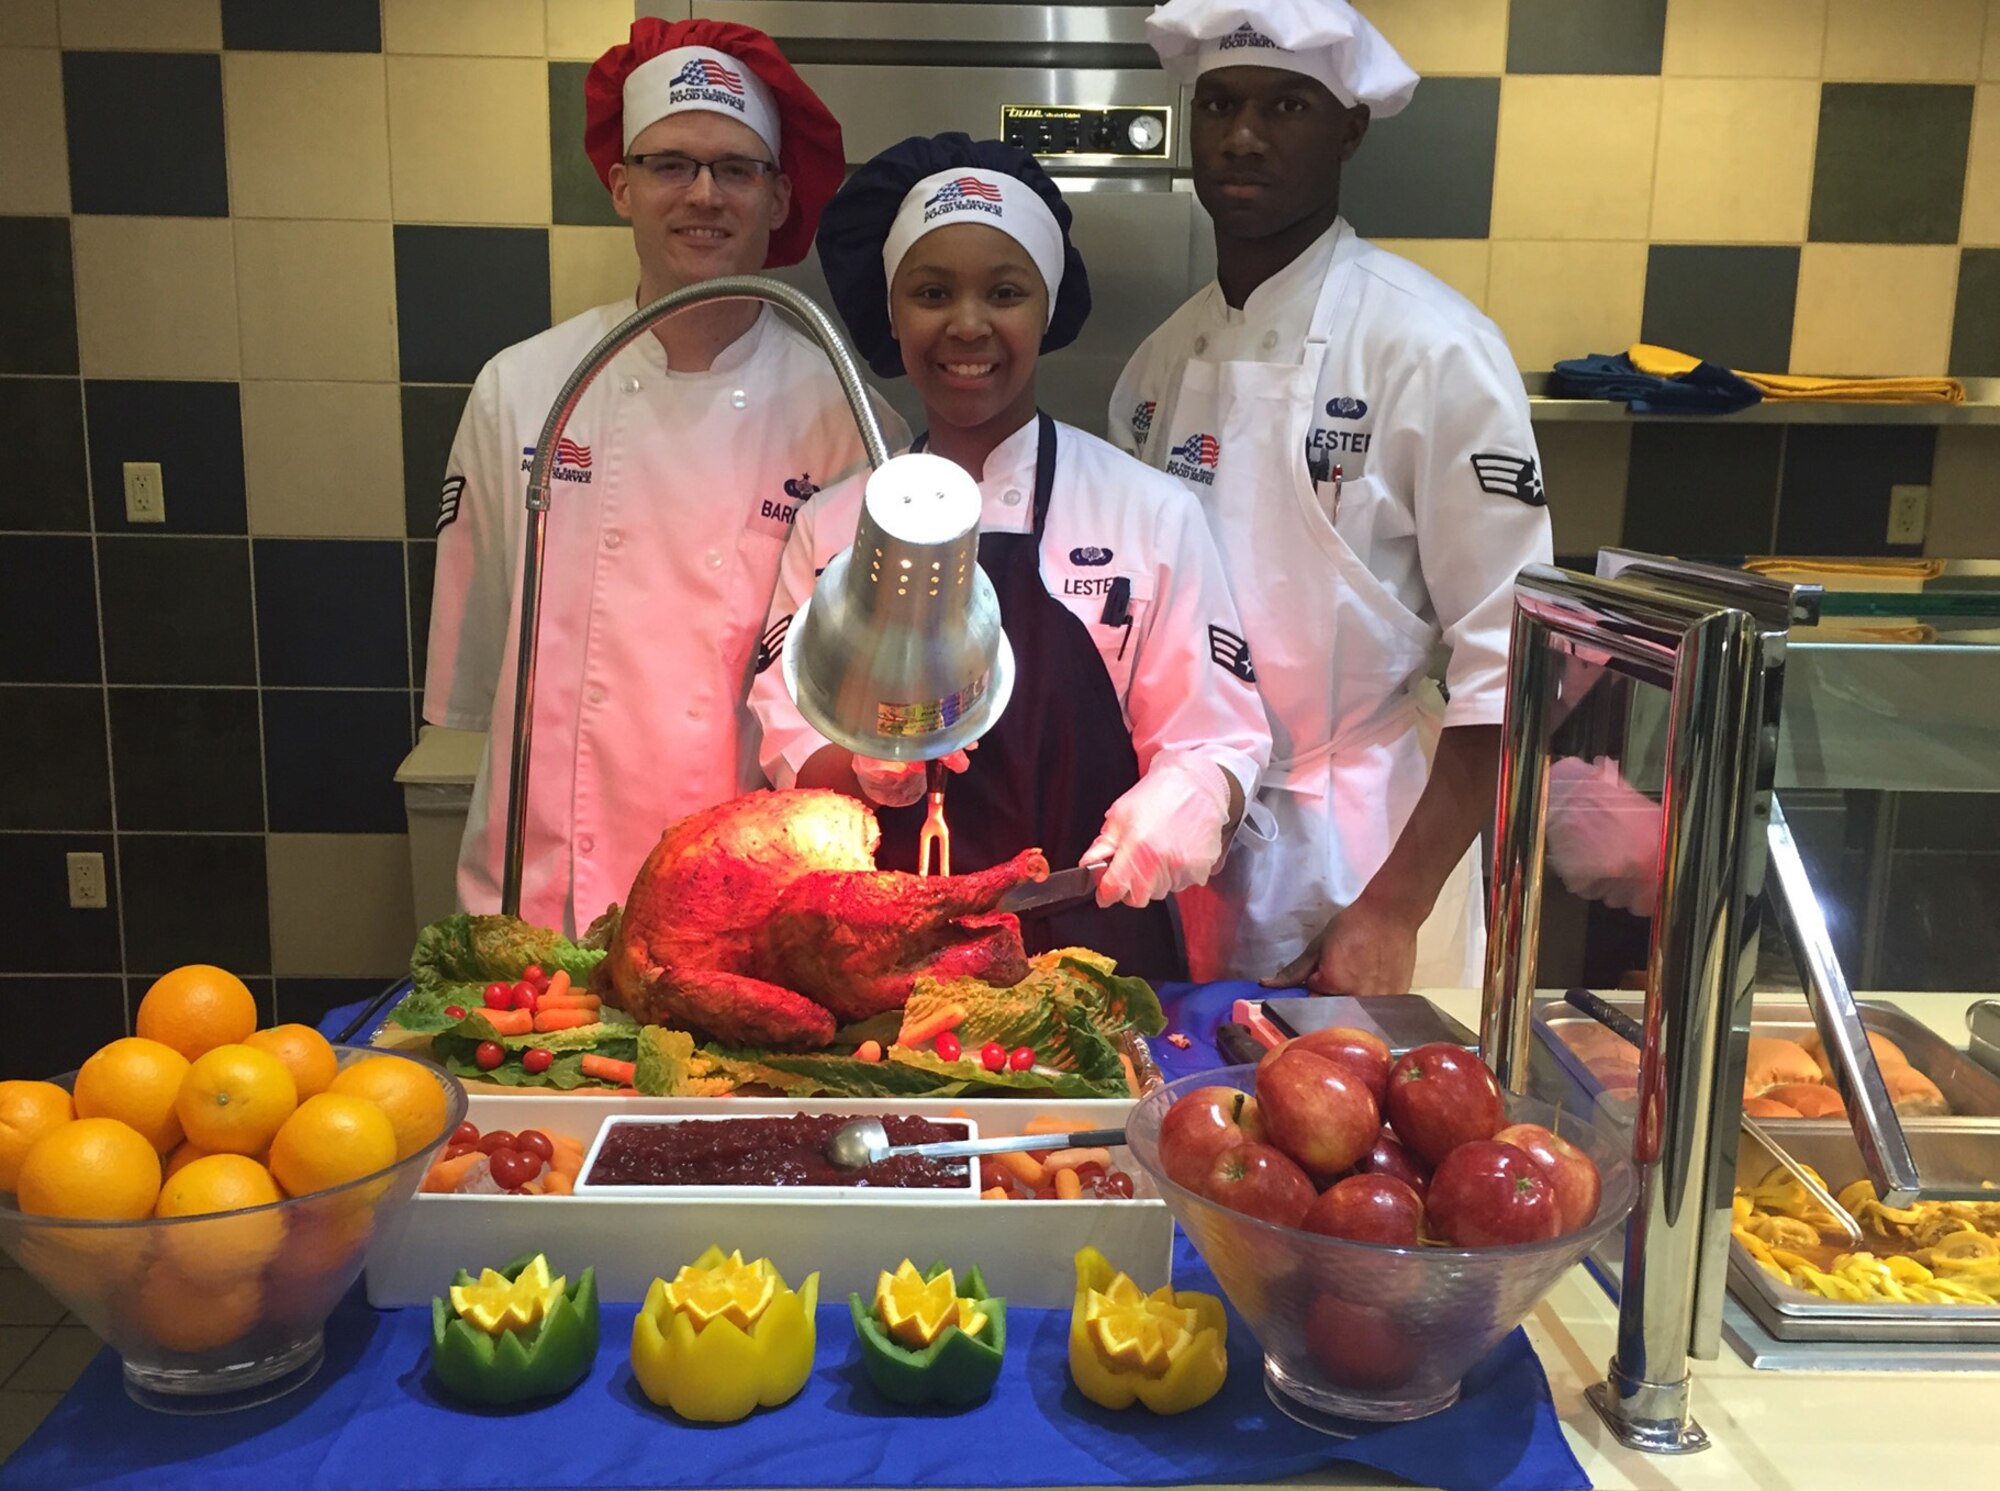 Staff Sgt. Dustin Barret (from left) and Senior Airmen Harri Lester and  D'Travian Lester showcase their skills at the award-winning dining facility on Little Rock Air Force Base, Arkansas. The facility won the 2017 John L. Hennessy Award in Region 1 (East) for best food service operation in the U.S. Air Force. (Courtesy photo/Harold Ritchie)